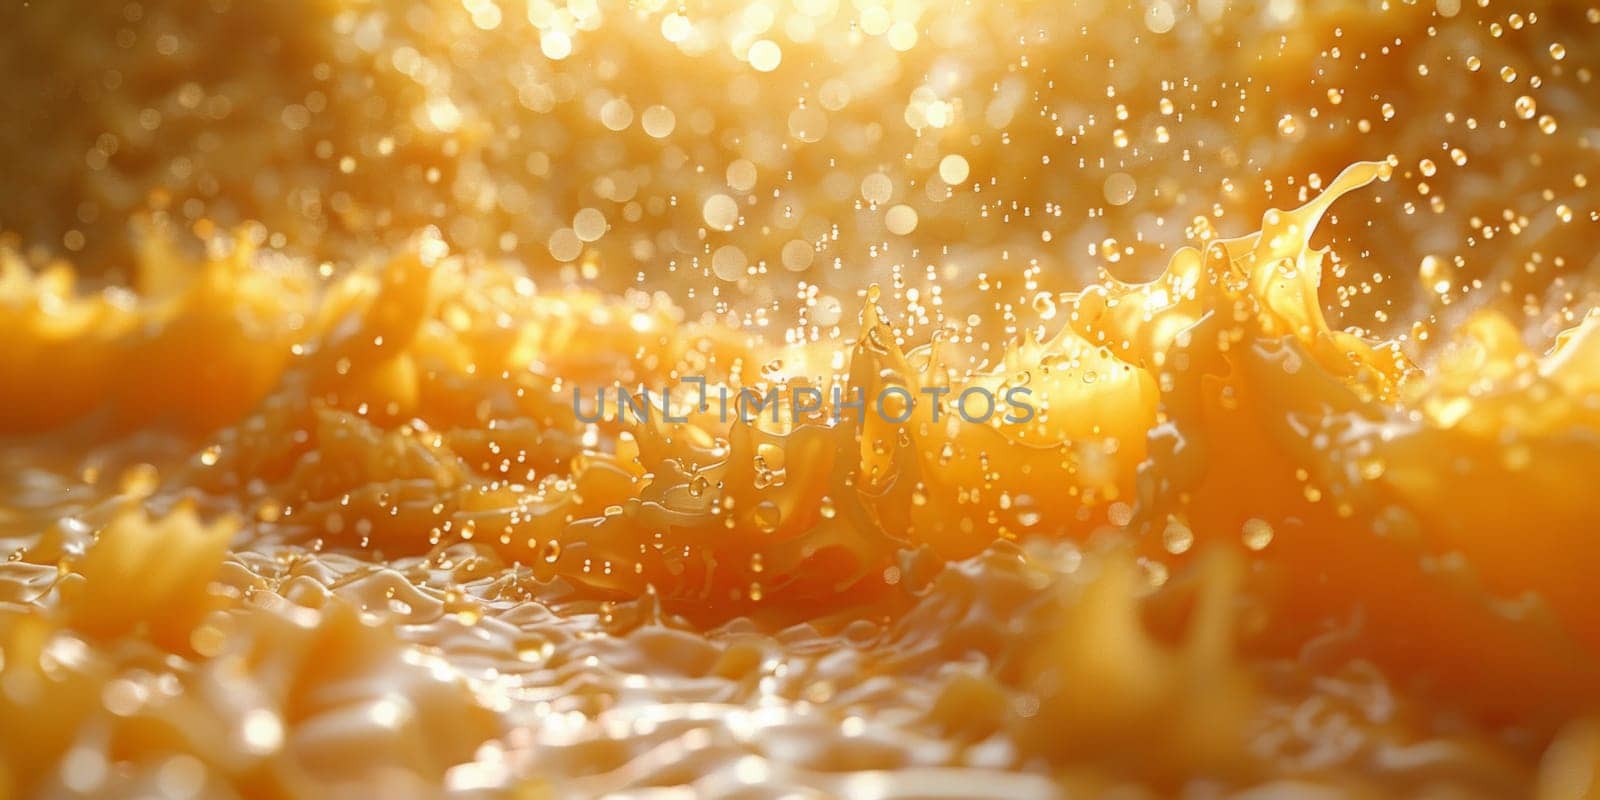 A close-up view of a bunch of oranges displayed elegantly on a table, their vibrant colors contrasting with the warm hues of the wooden surface.